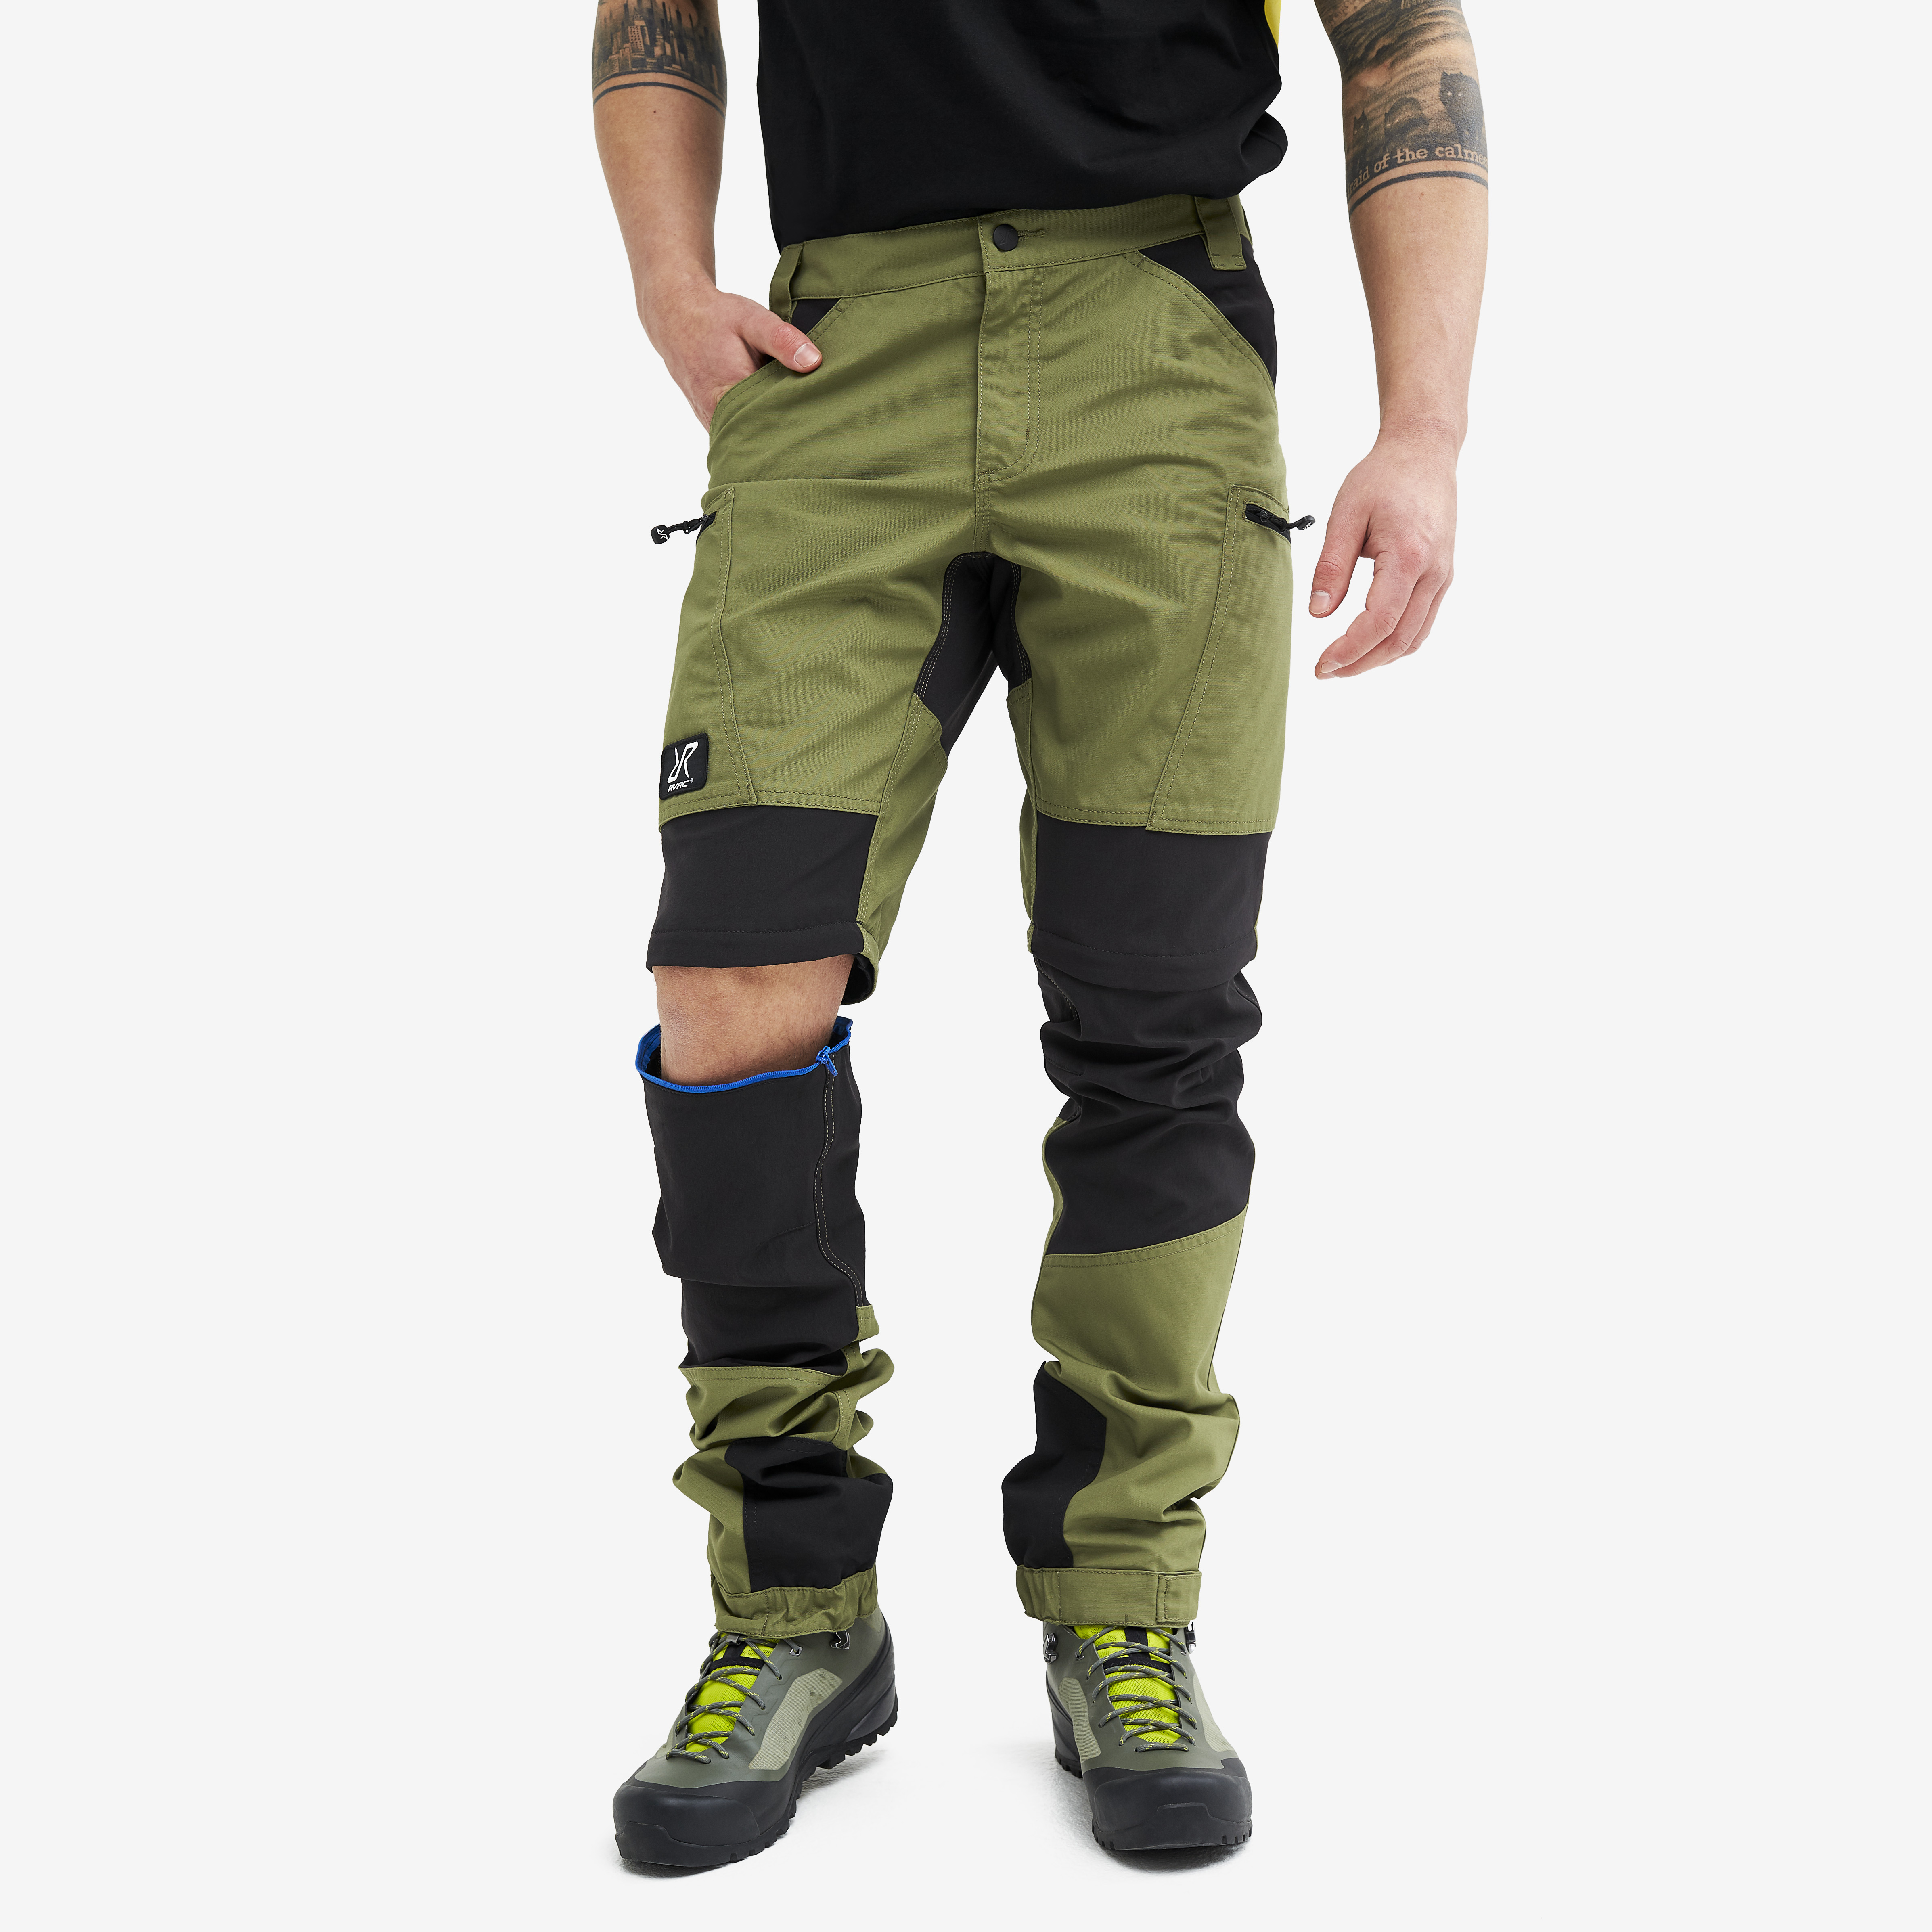 Nordwand Pro Zip-off hiking pants for men in green